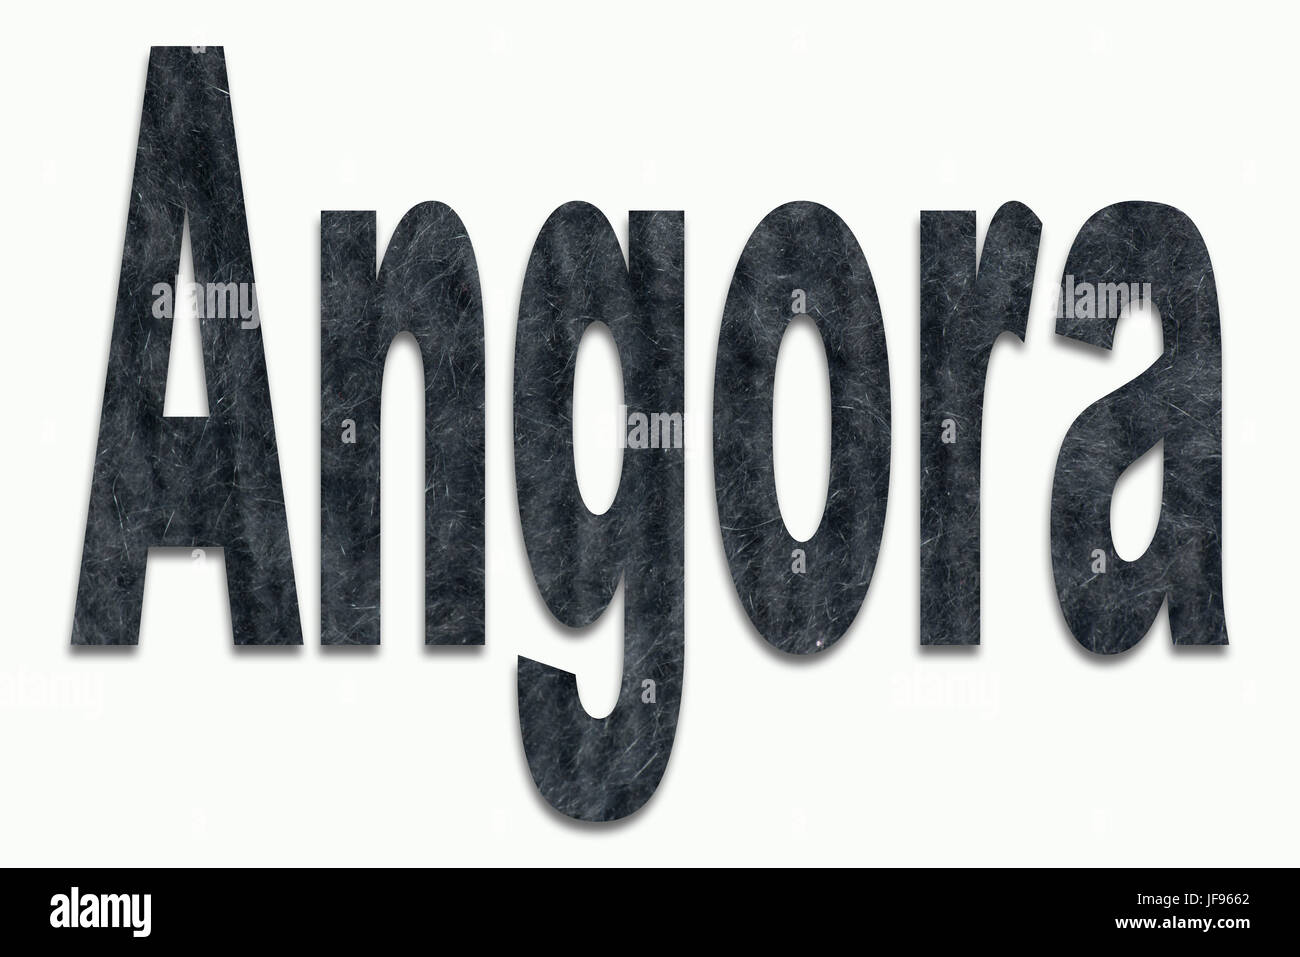 Angora Wool in a font trained Stock Photo